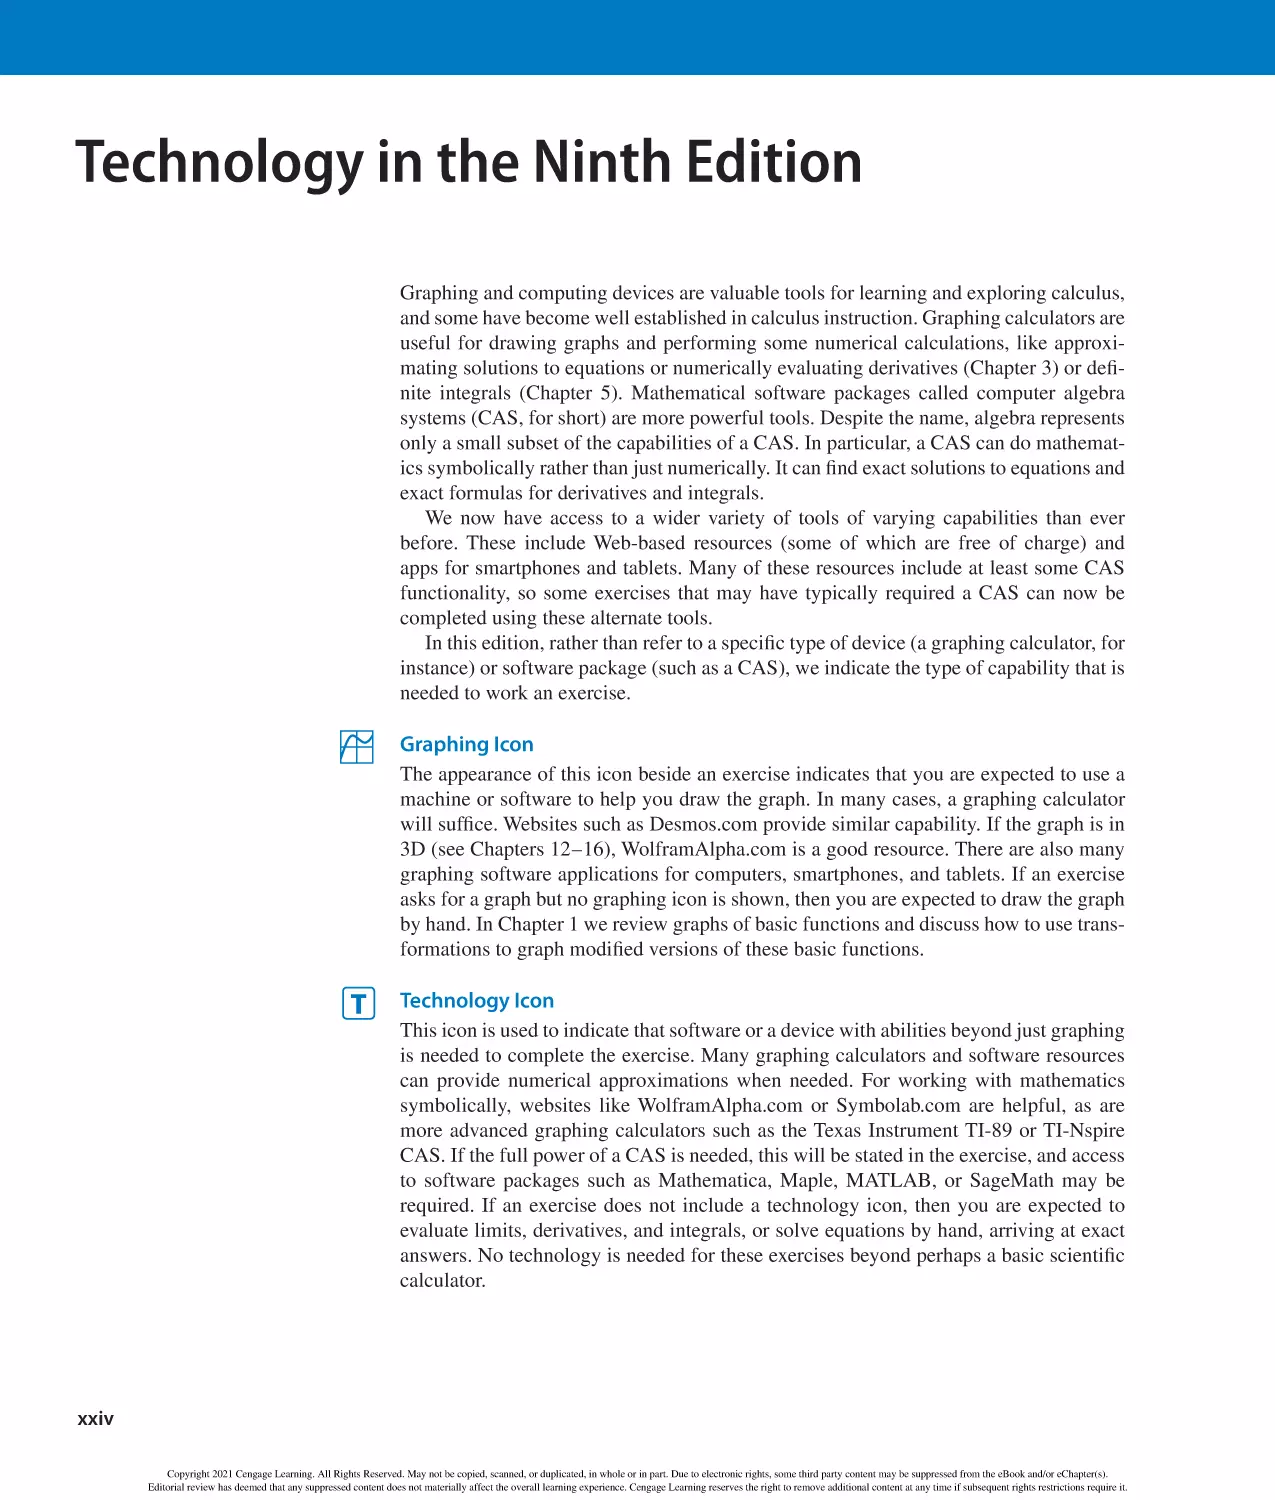 Technology in the Ninth Edition